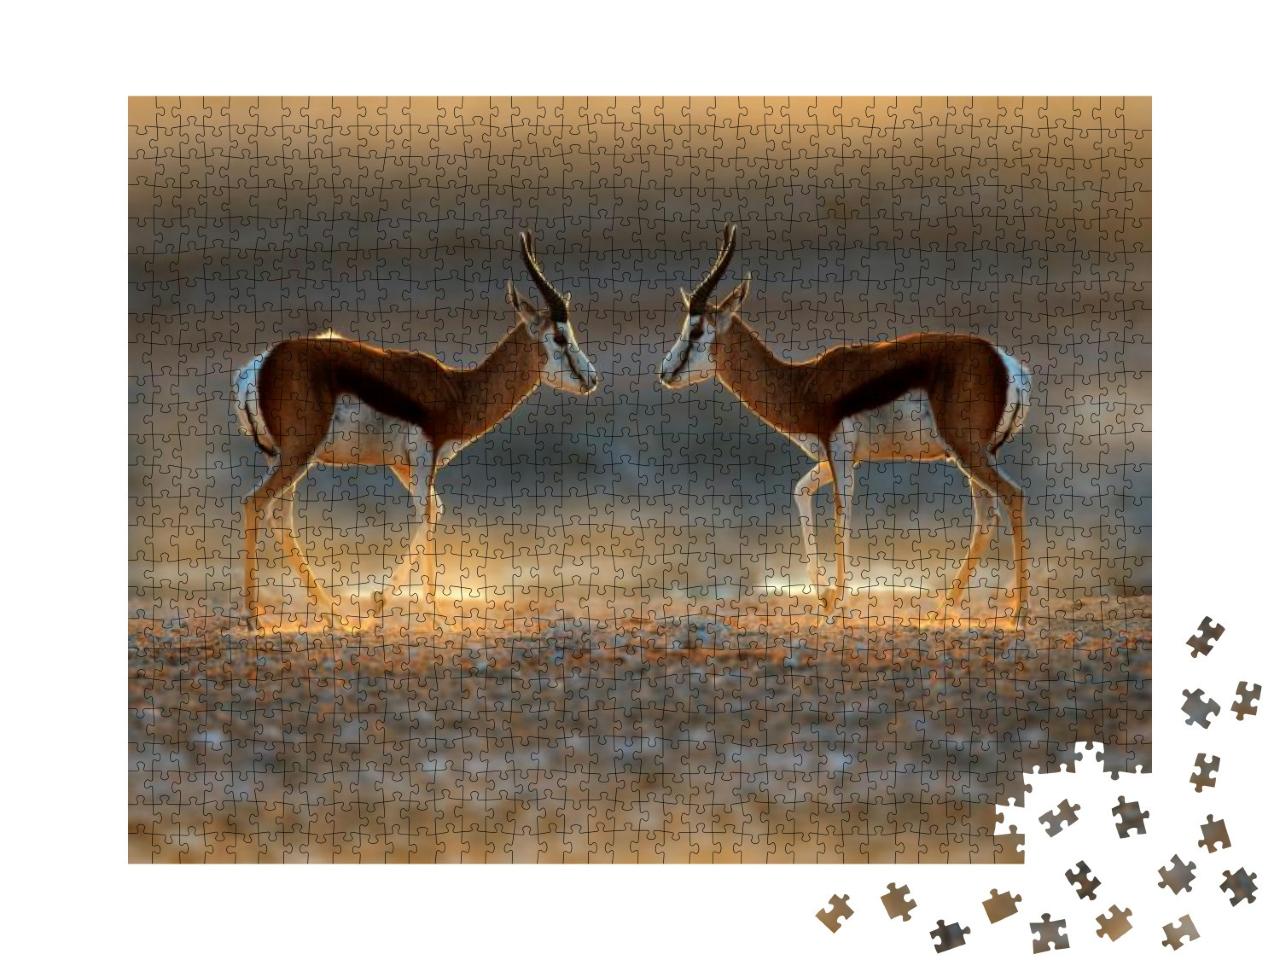 Springbok Antelope, Antidorcas Marsupialis, in the Africa... Jigsaw Puzzle with 1000 pieces